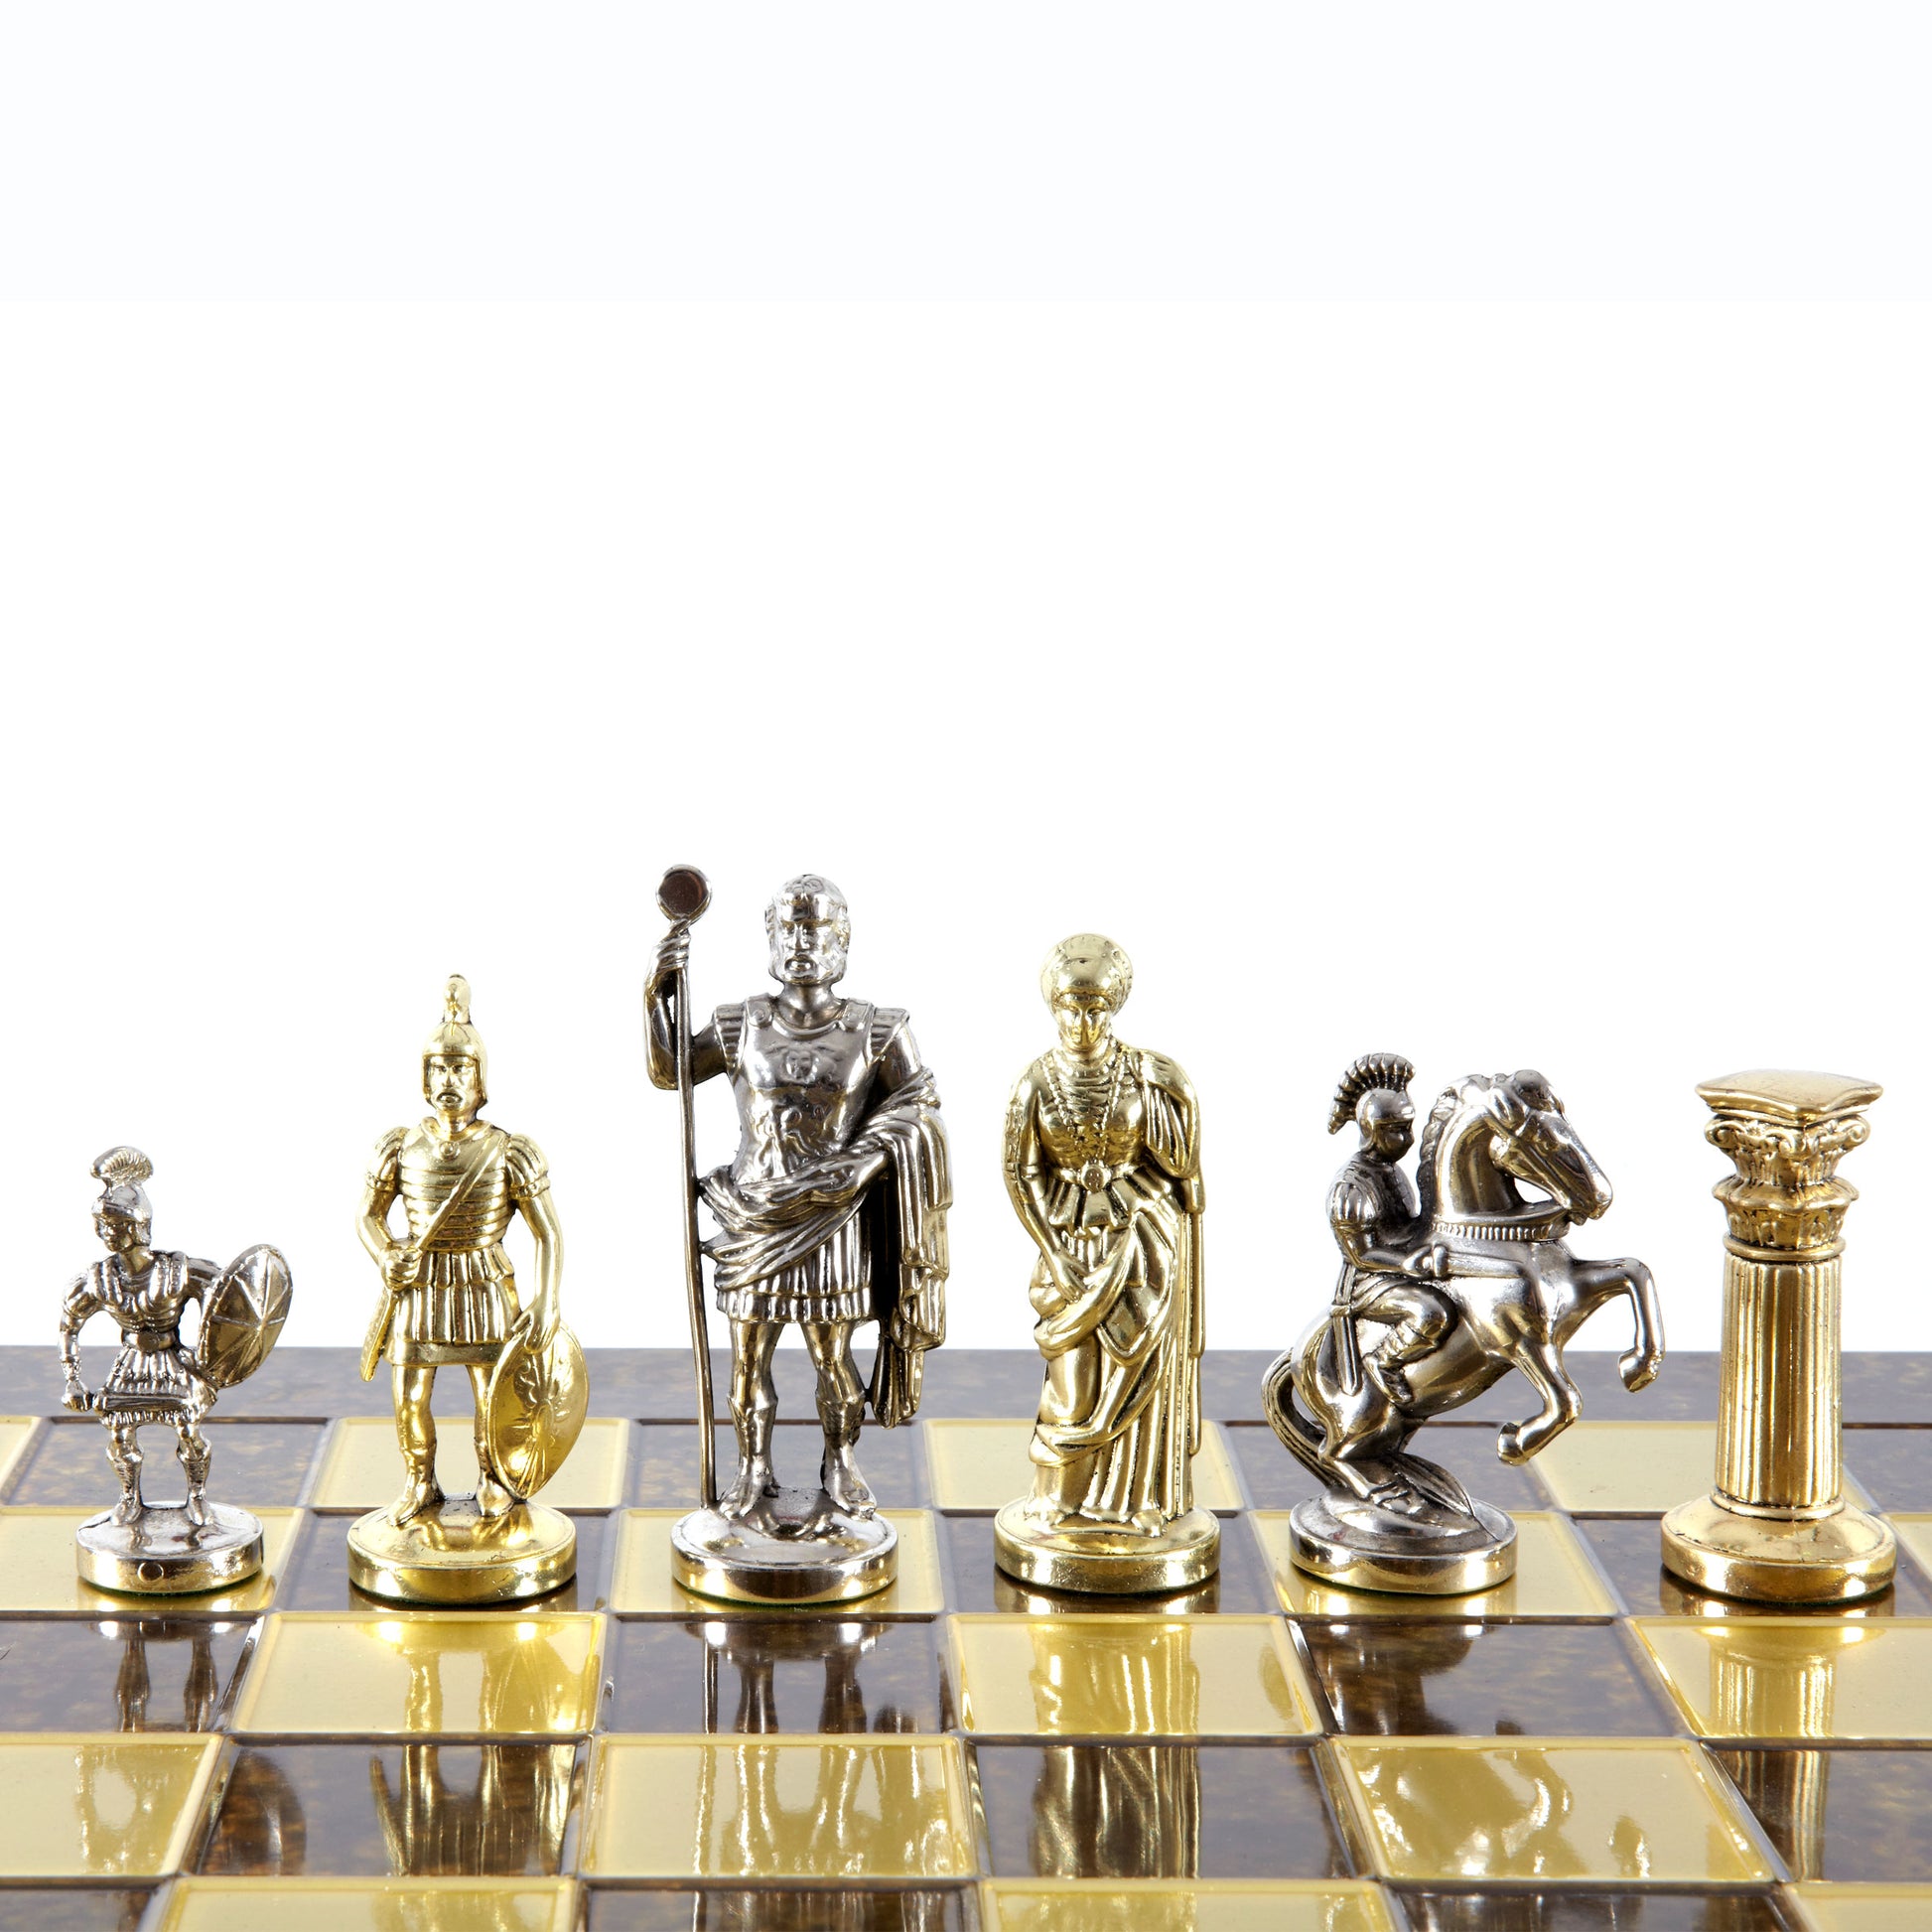 GREEK ROMAN PERIOD CHESS SET with gold/silver chessmen and bronze chessboard 44 x 44cm (Large) - Premium Chess from MANOPOULOS Chess & Backgammon - Just €275! Shop now at MANOPOULOS Chess & Backgammon